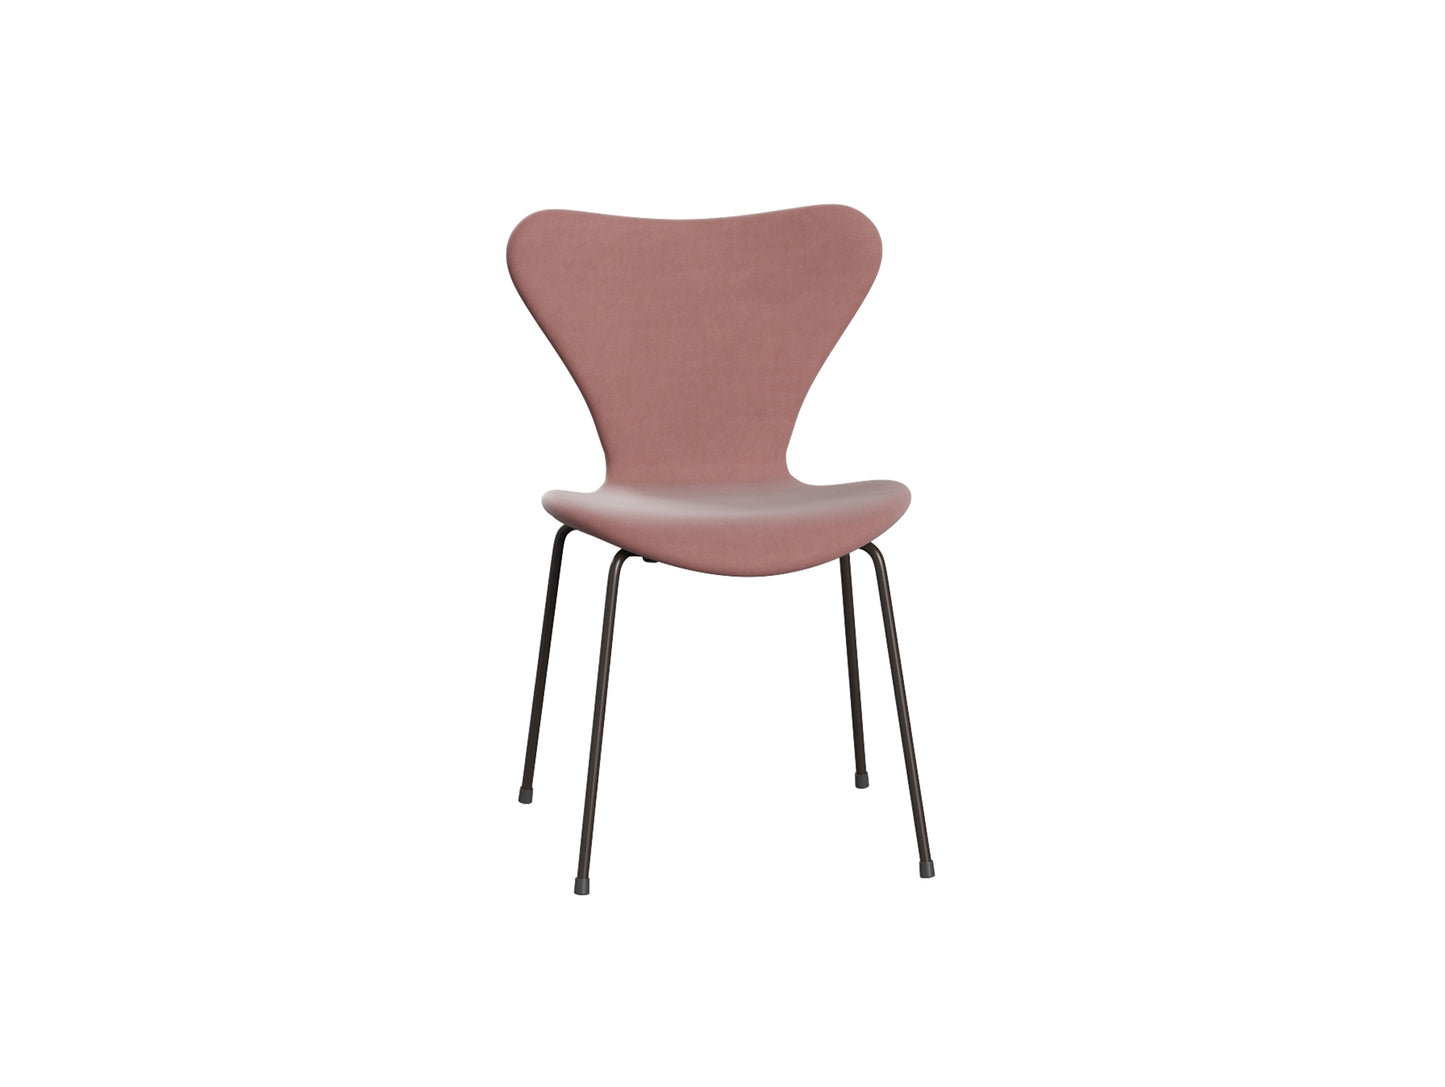 Series 7™ 3107 Dining Chair (Fully Upholstered) by Fritz Hansen - Brown Bronze Steel / Belfase Misty Rose